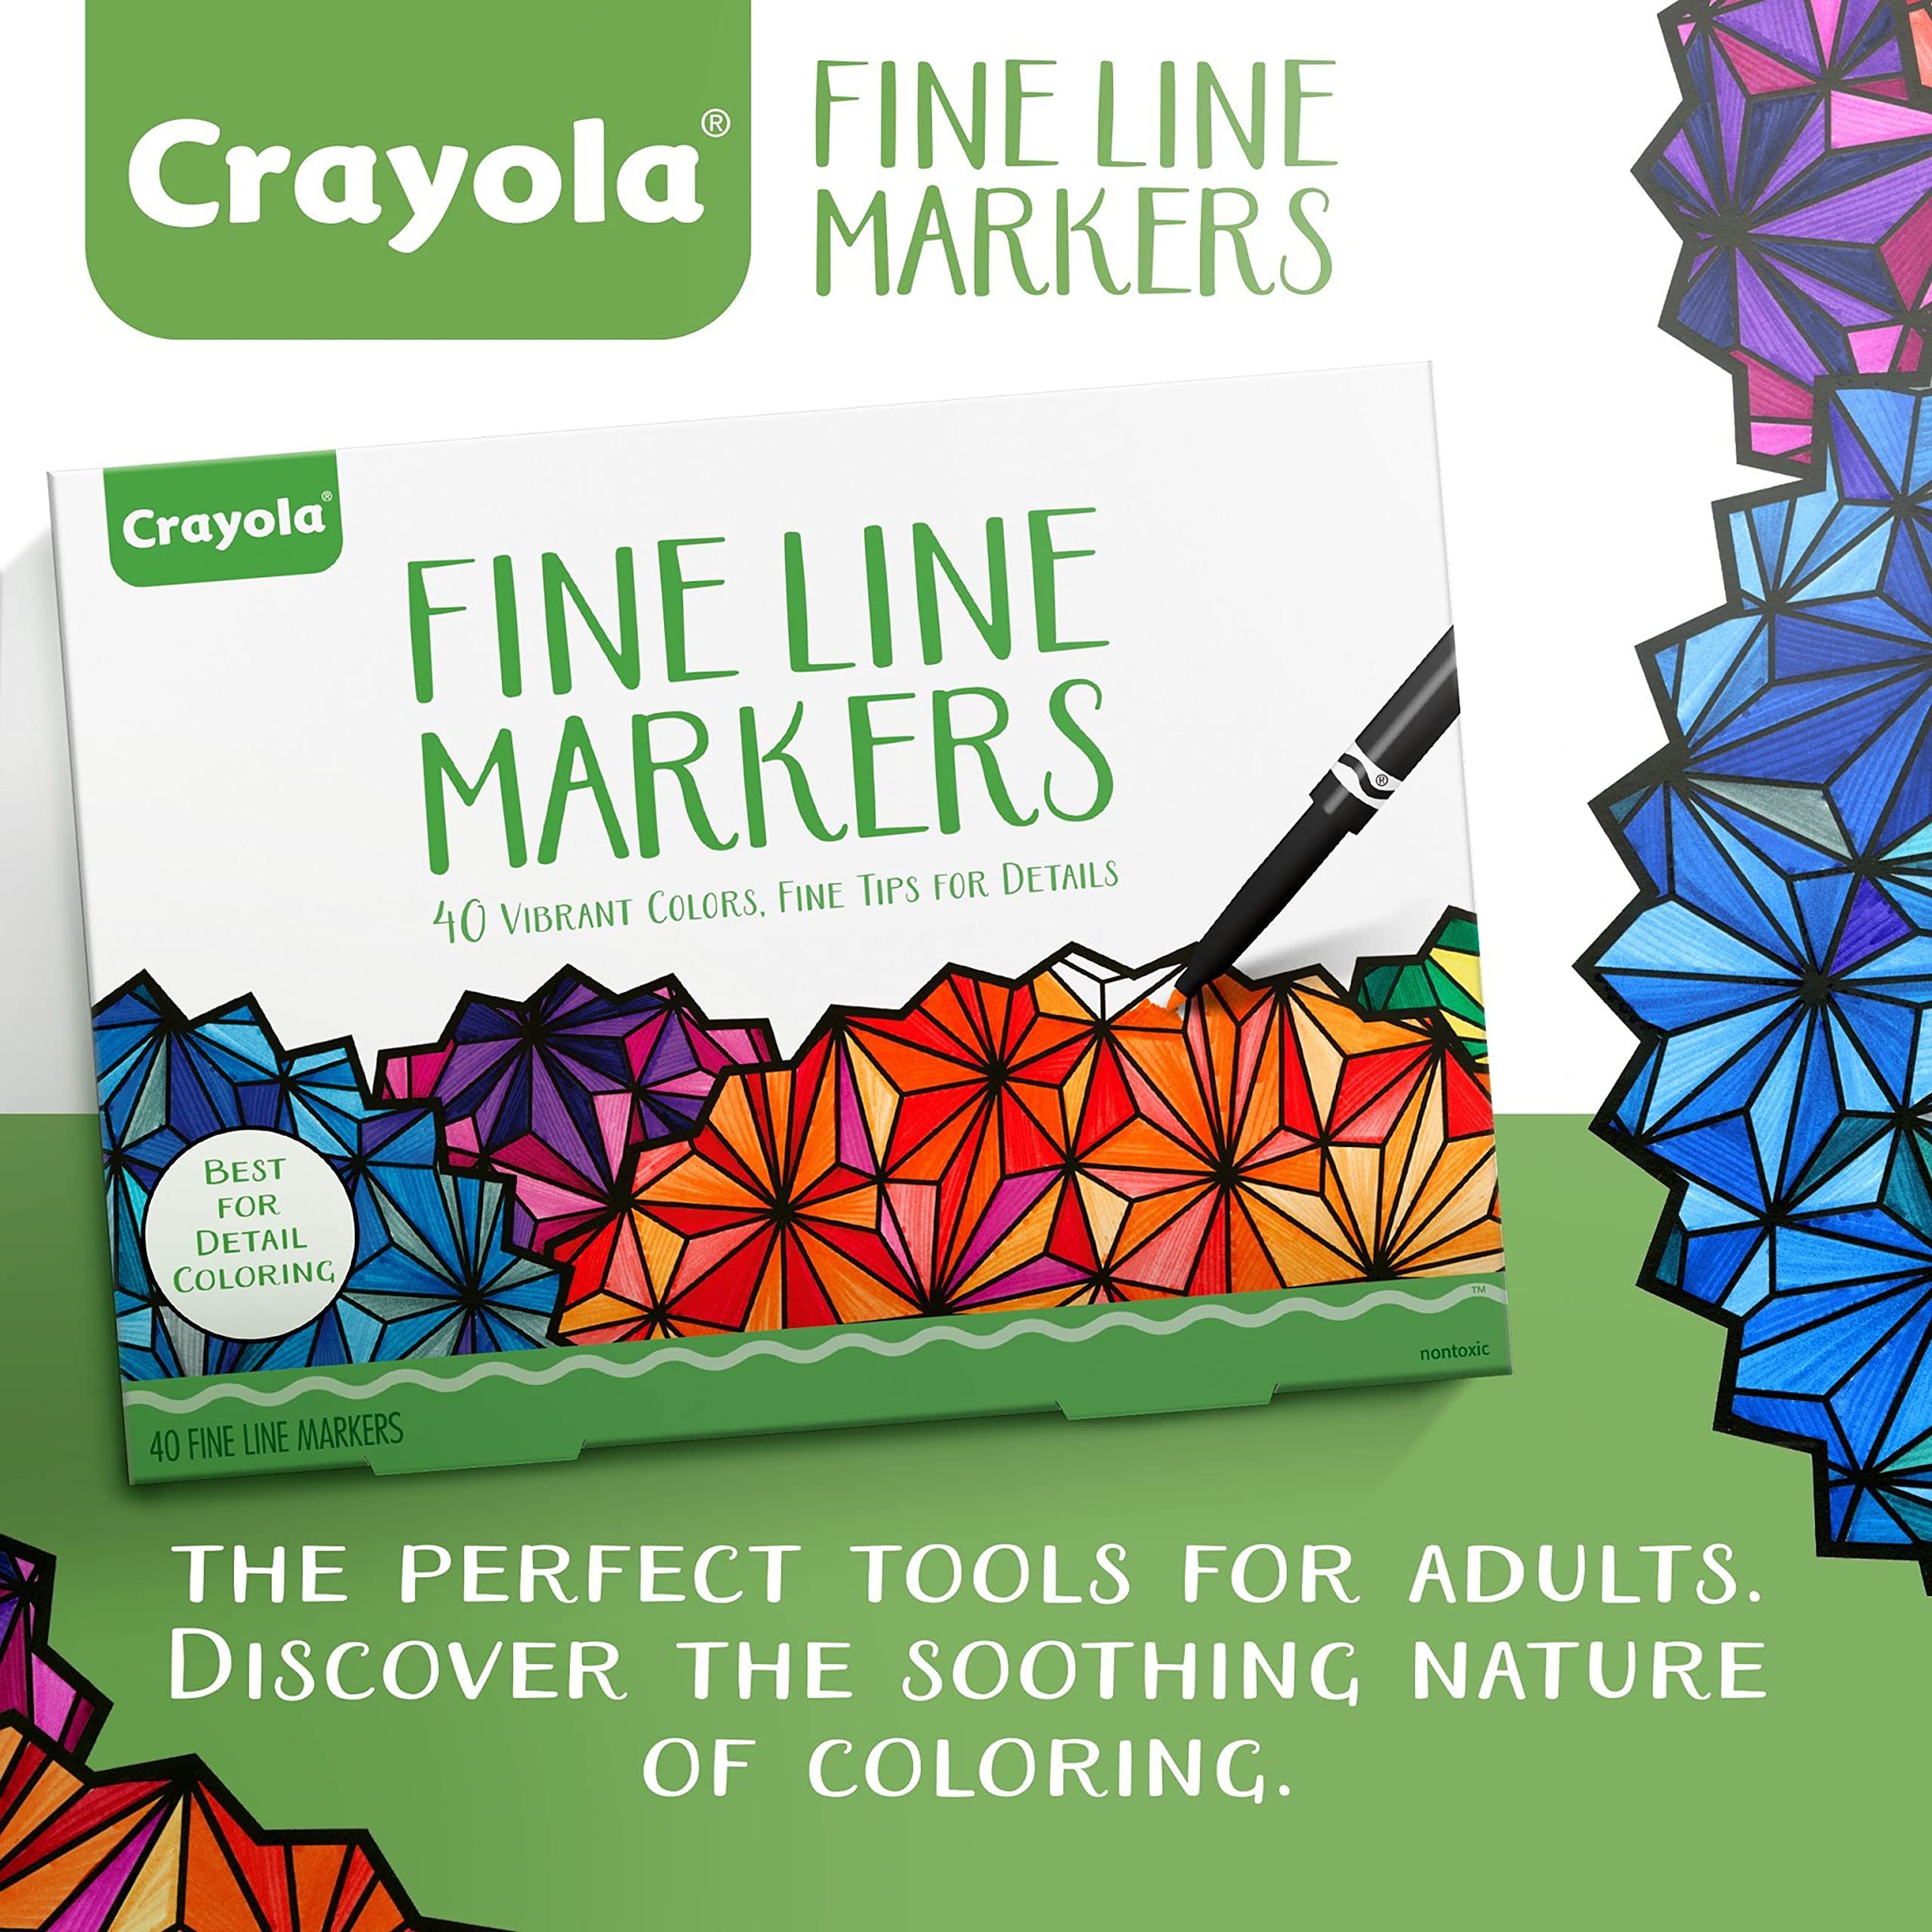 Crayola Fine Line Markers For Adults 40 Count, Fine Line Markers for Adult Coloring Books, Back to School Markers [Amazon Exclusive]